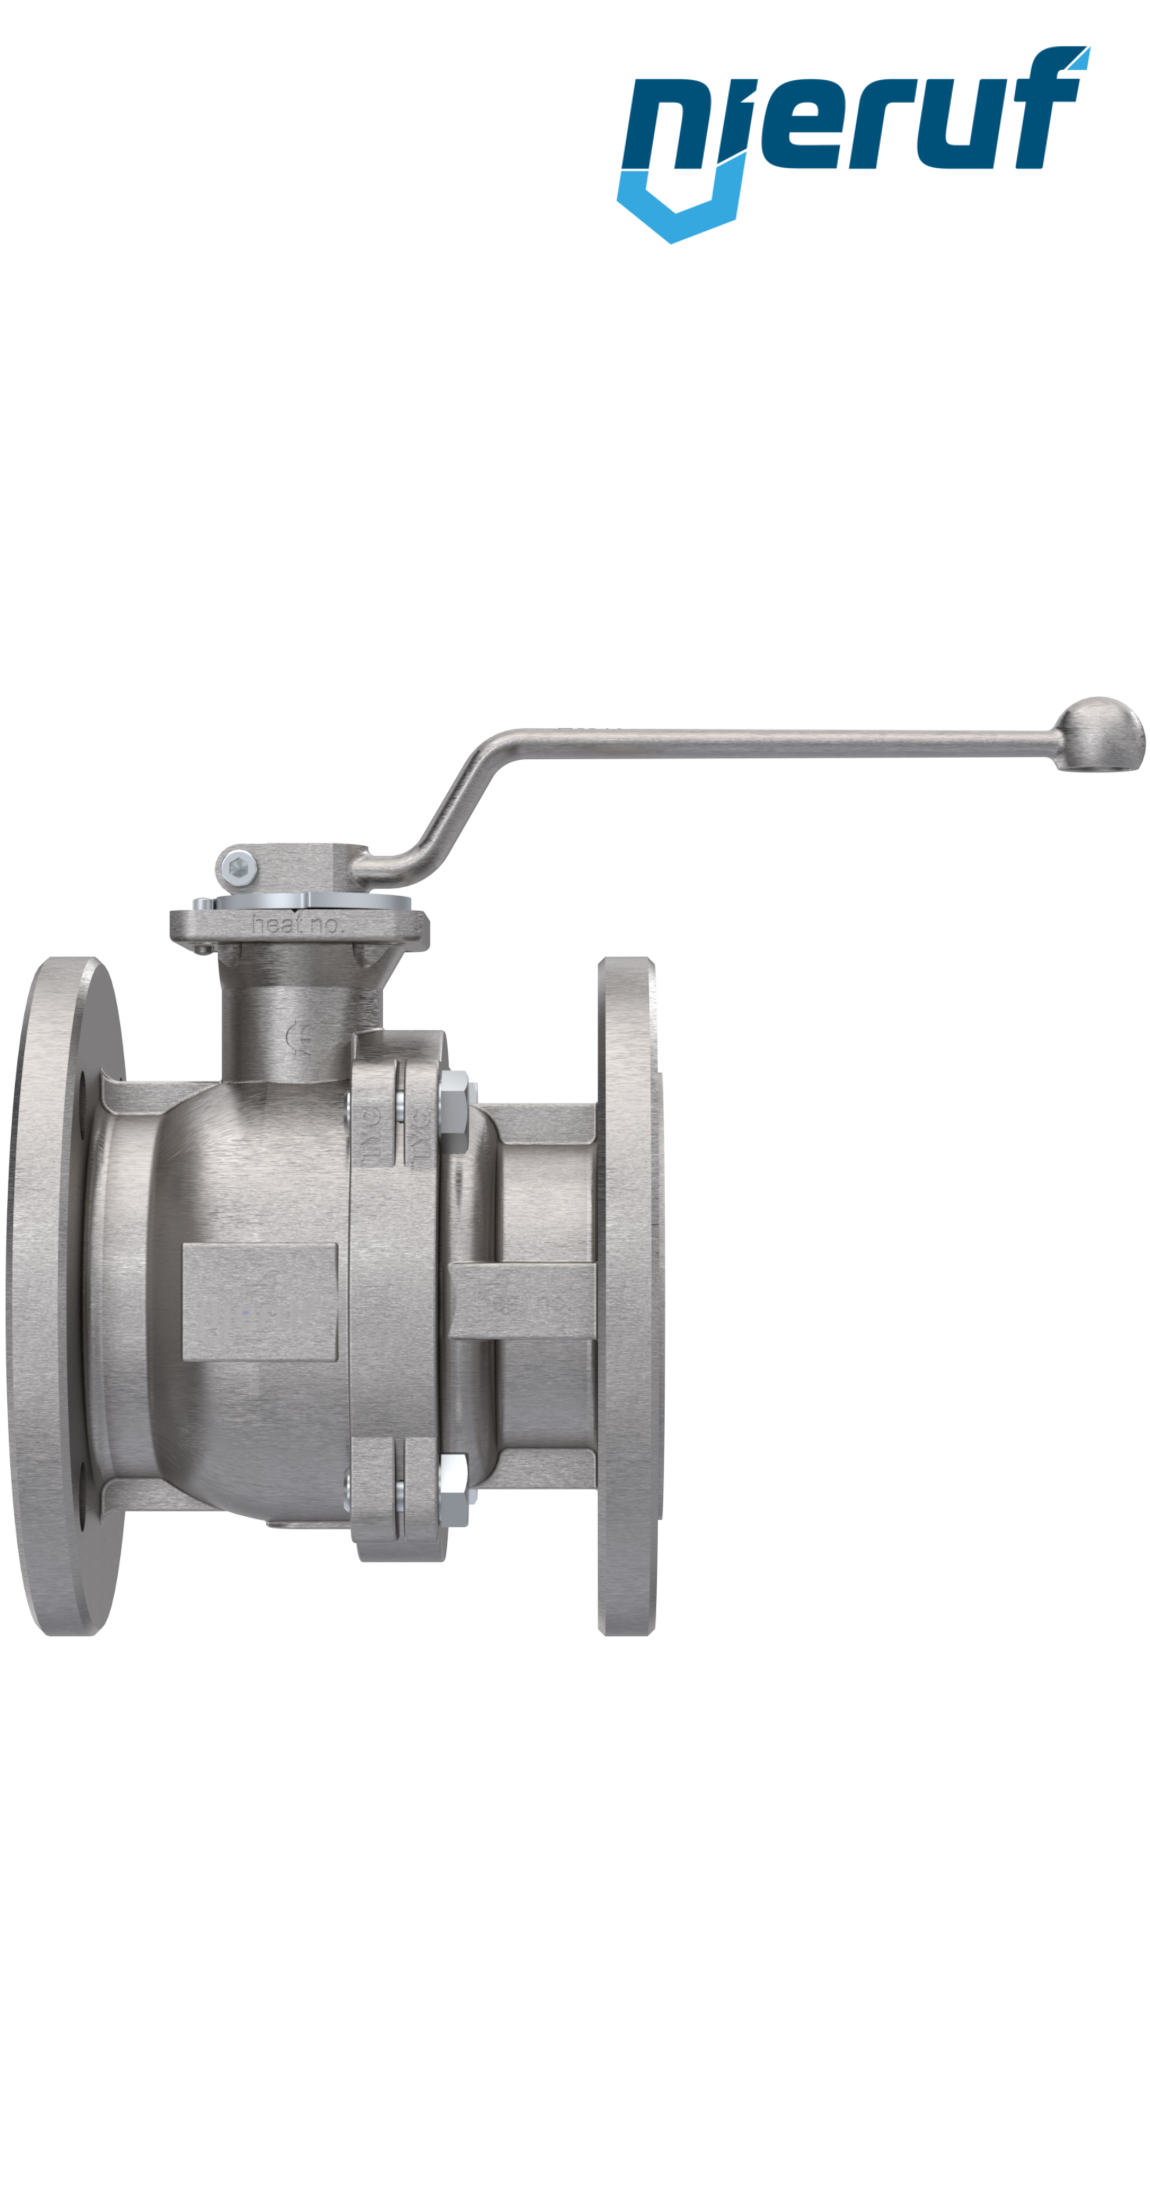 Gas-flange ball valve FK05 DN40 PN40 made of stainless steel 1.4408